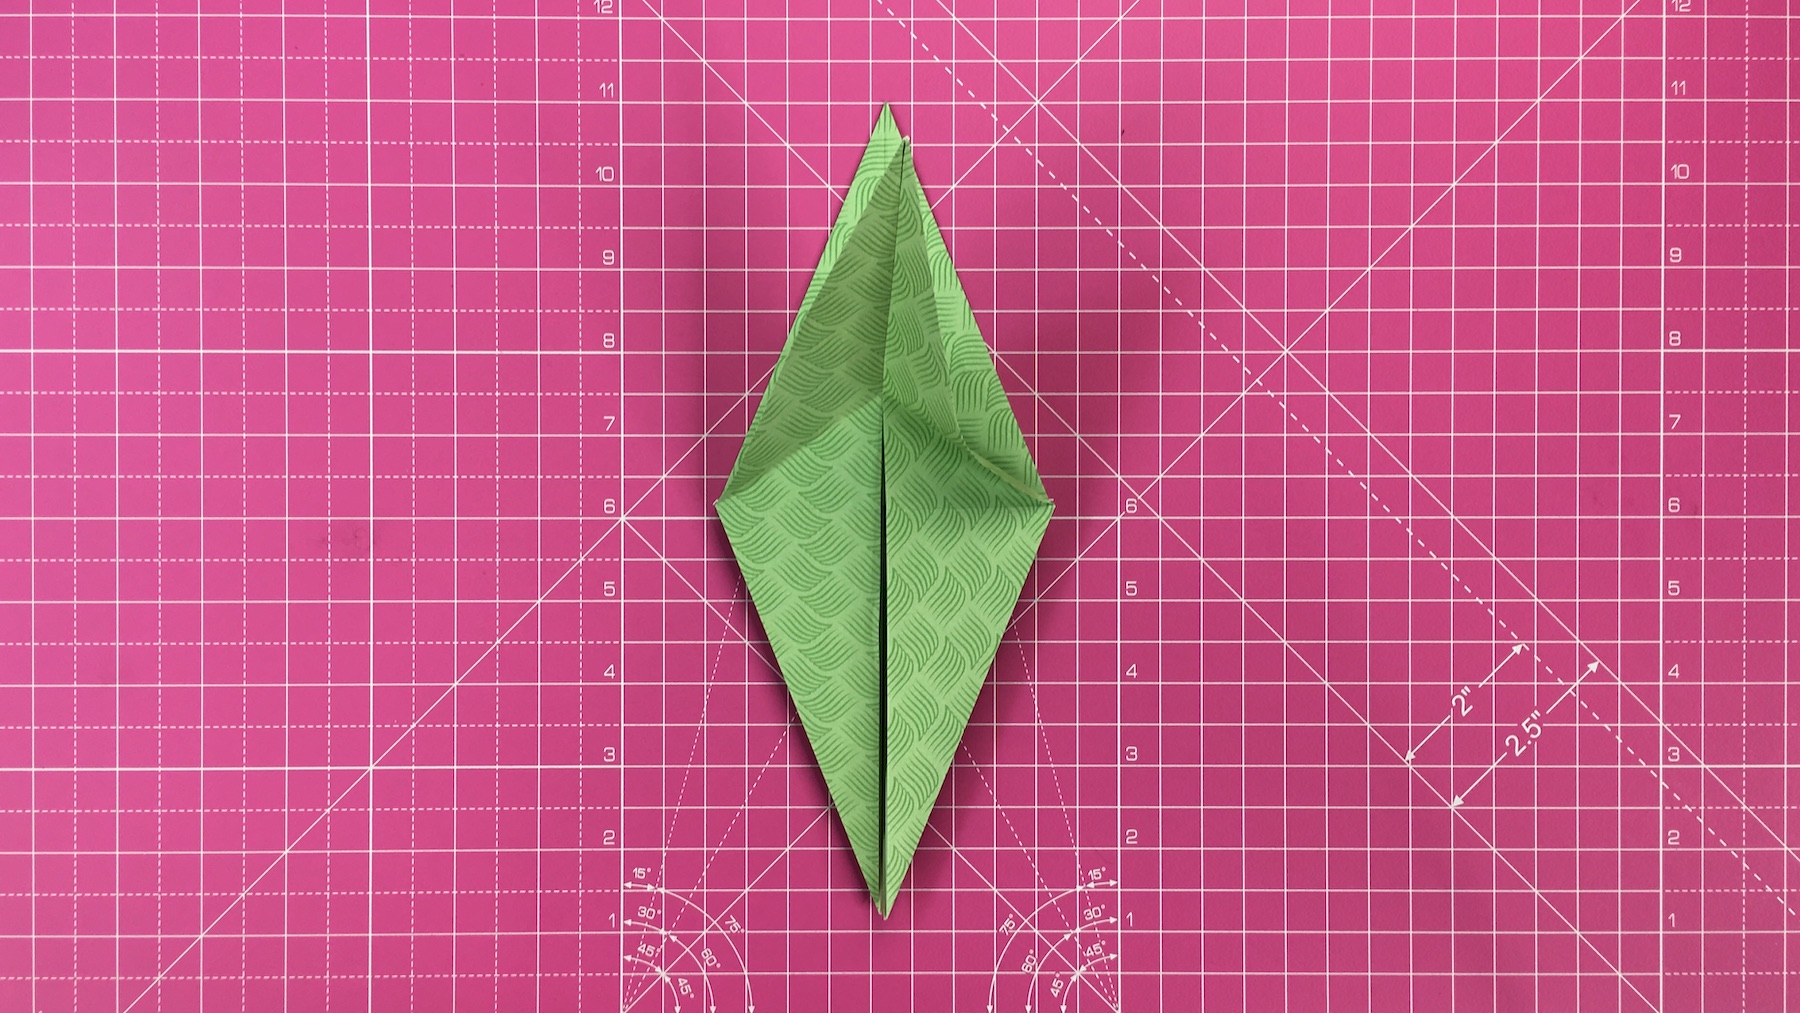 How to make an origami dragon, origami dragon tutorial - step 21a